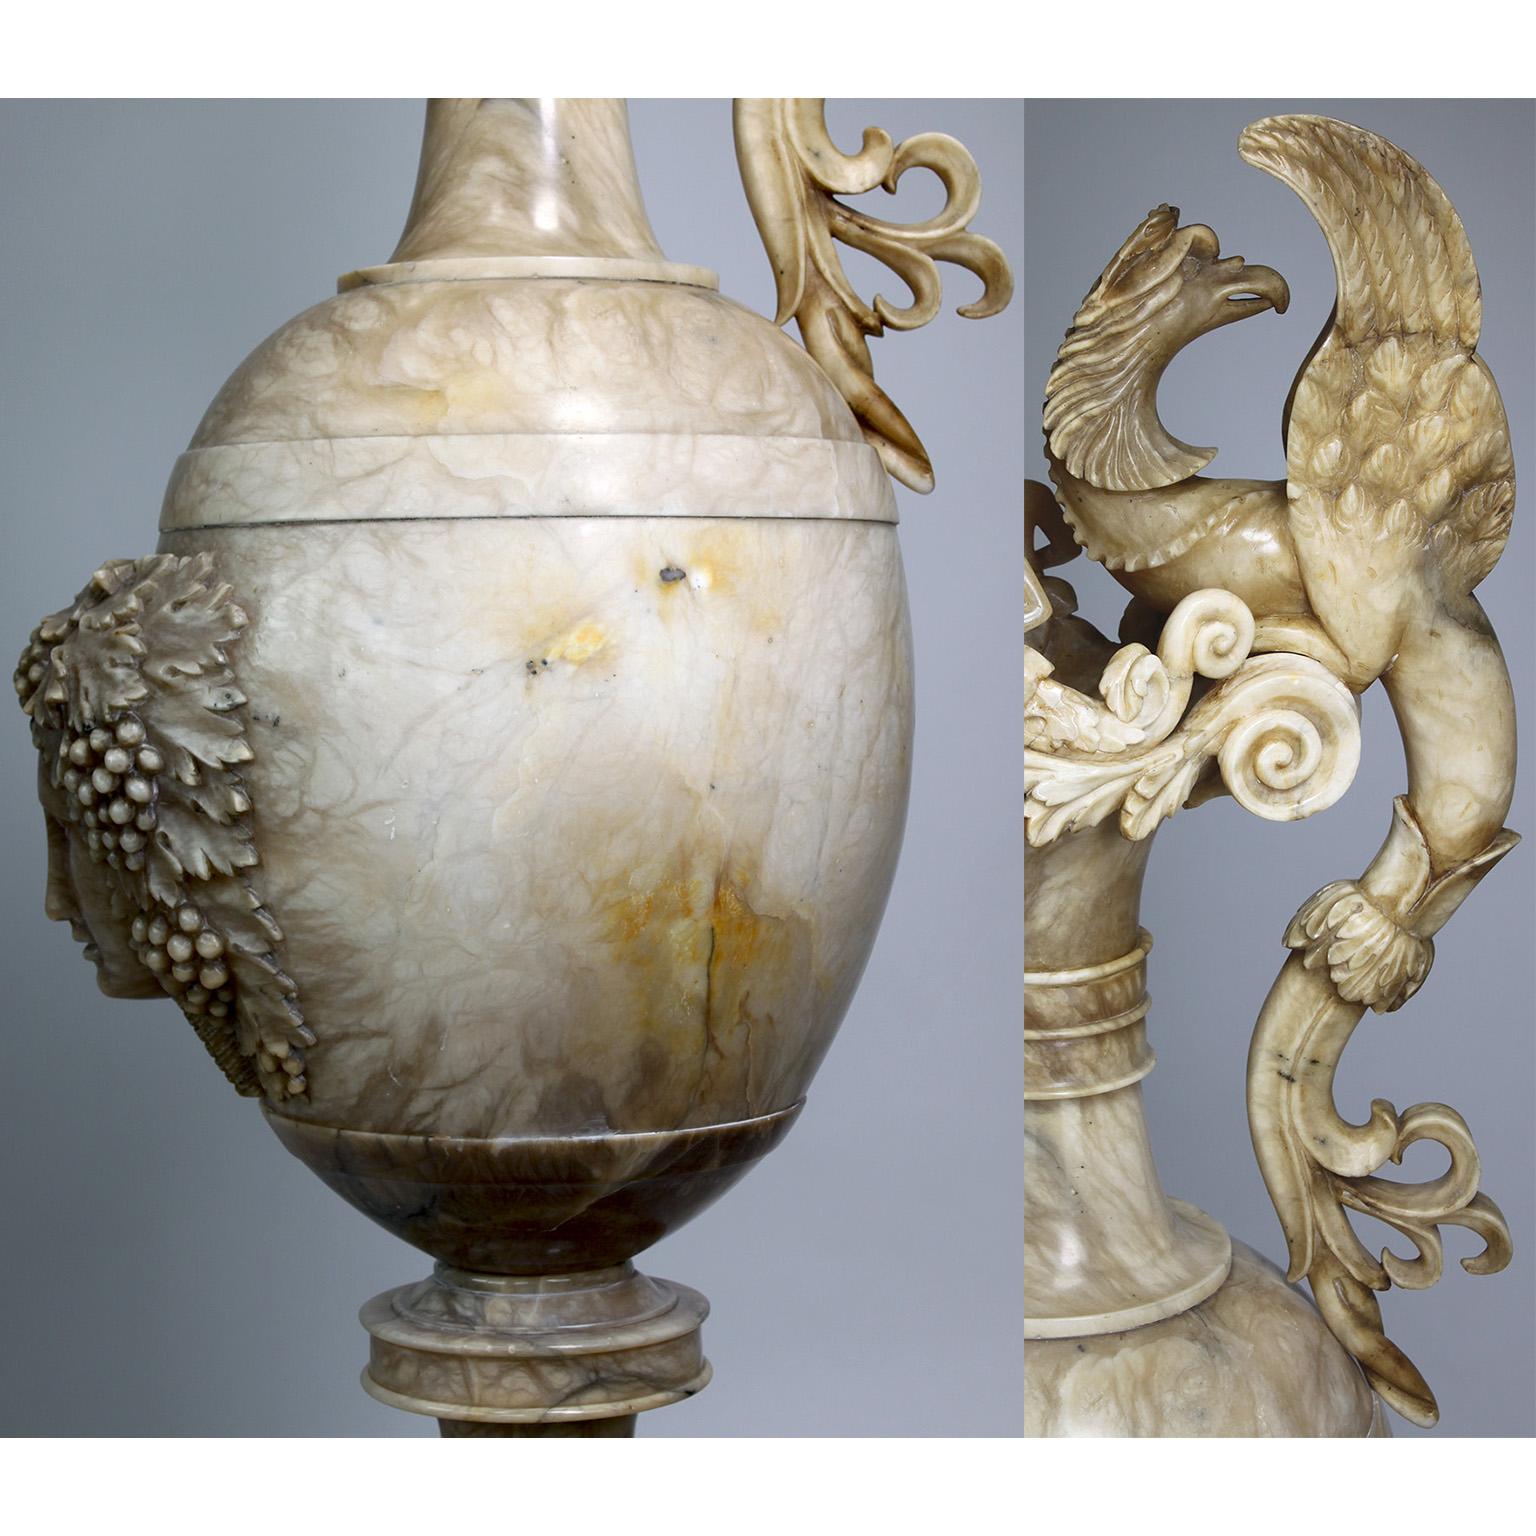 Monumental Italian 19th Century Renaissance Revival Style Carved Alabaster Urn  For Sale 12